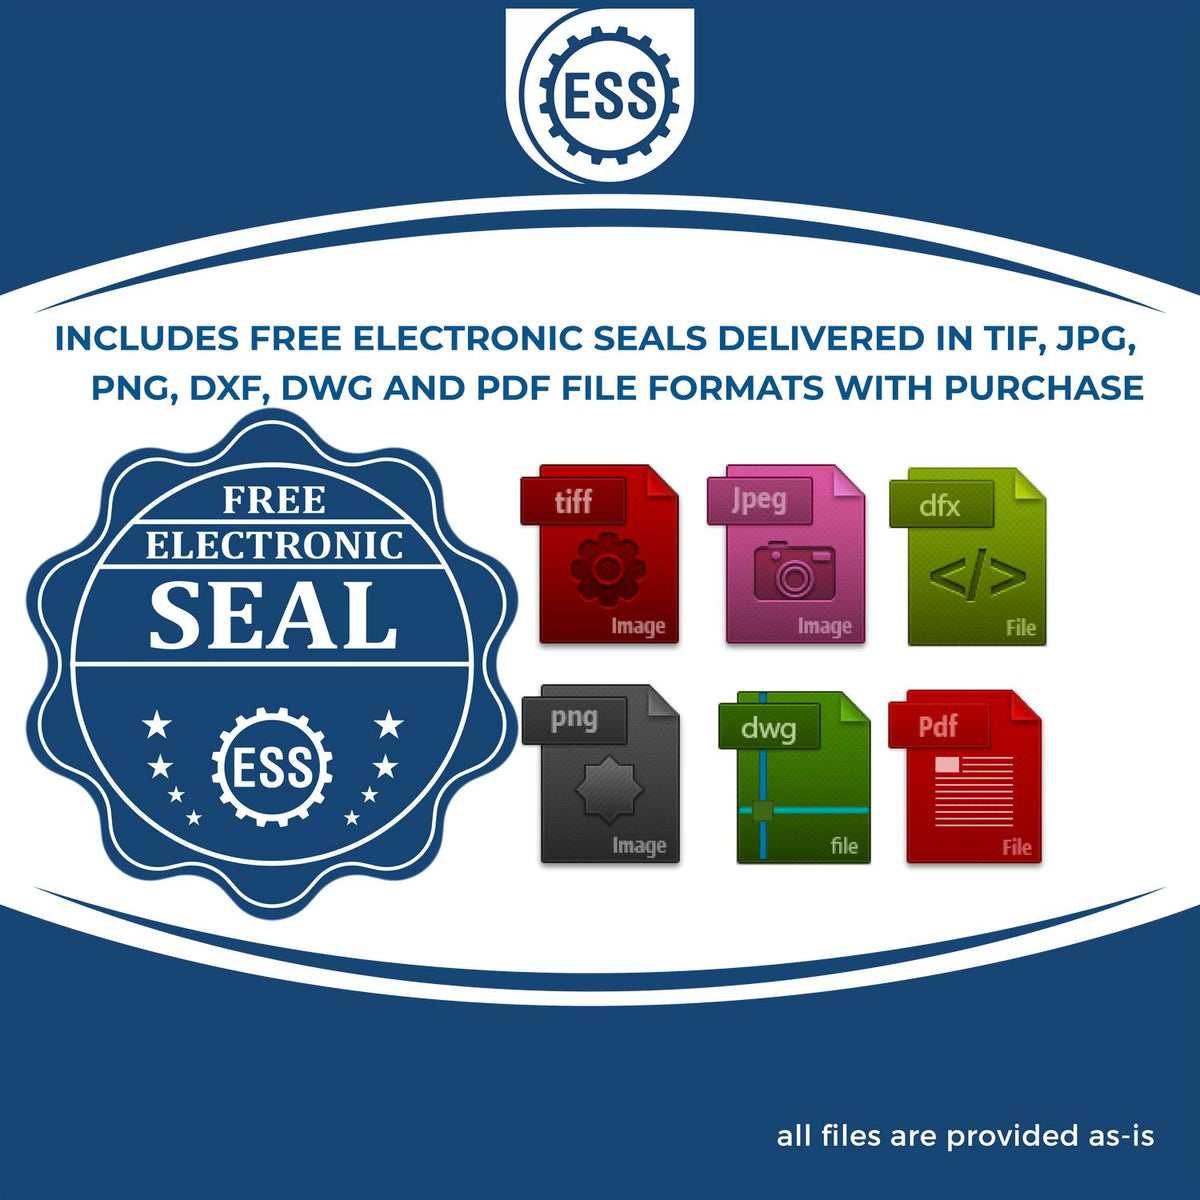 An infographic for the free electronic seal for the Heavy-Duty Oregon Rectangular Notary Stamp illustrating the different file type icons such as DXF, DWG, TIF, JPG and PNG.